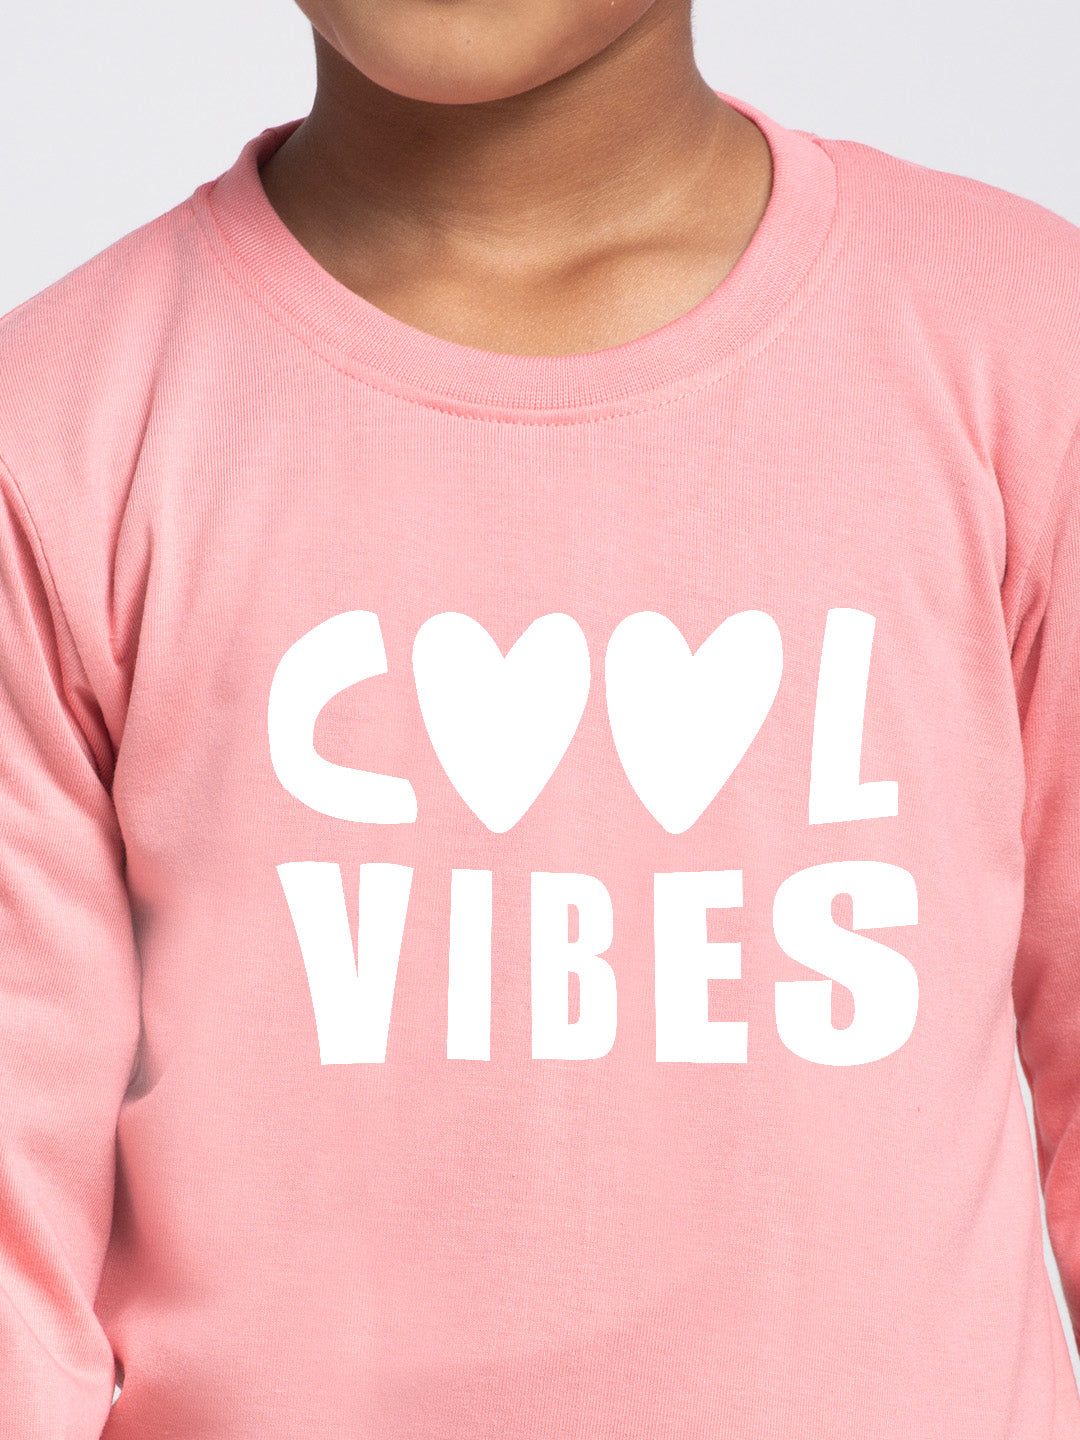 Kids cool vibes printed full sleeves t-shirt - Friskers